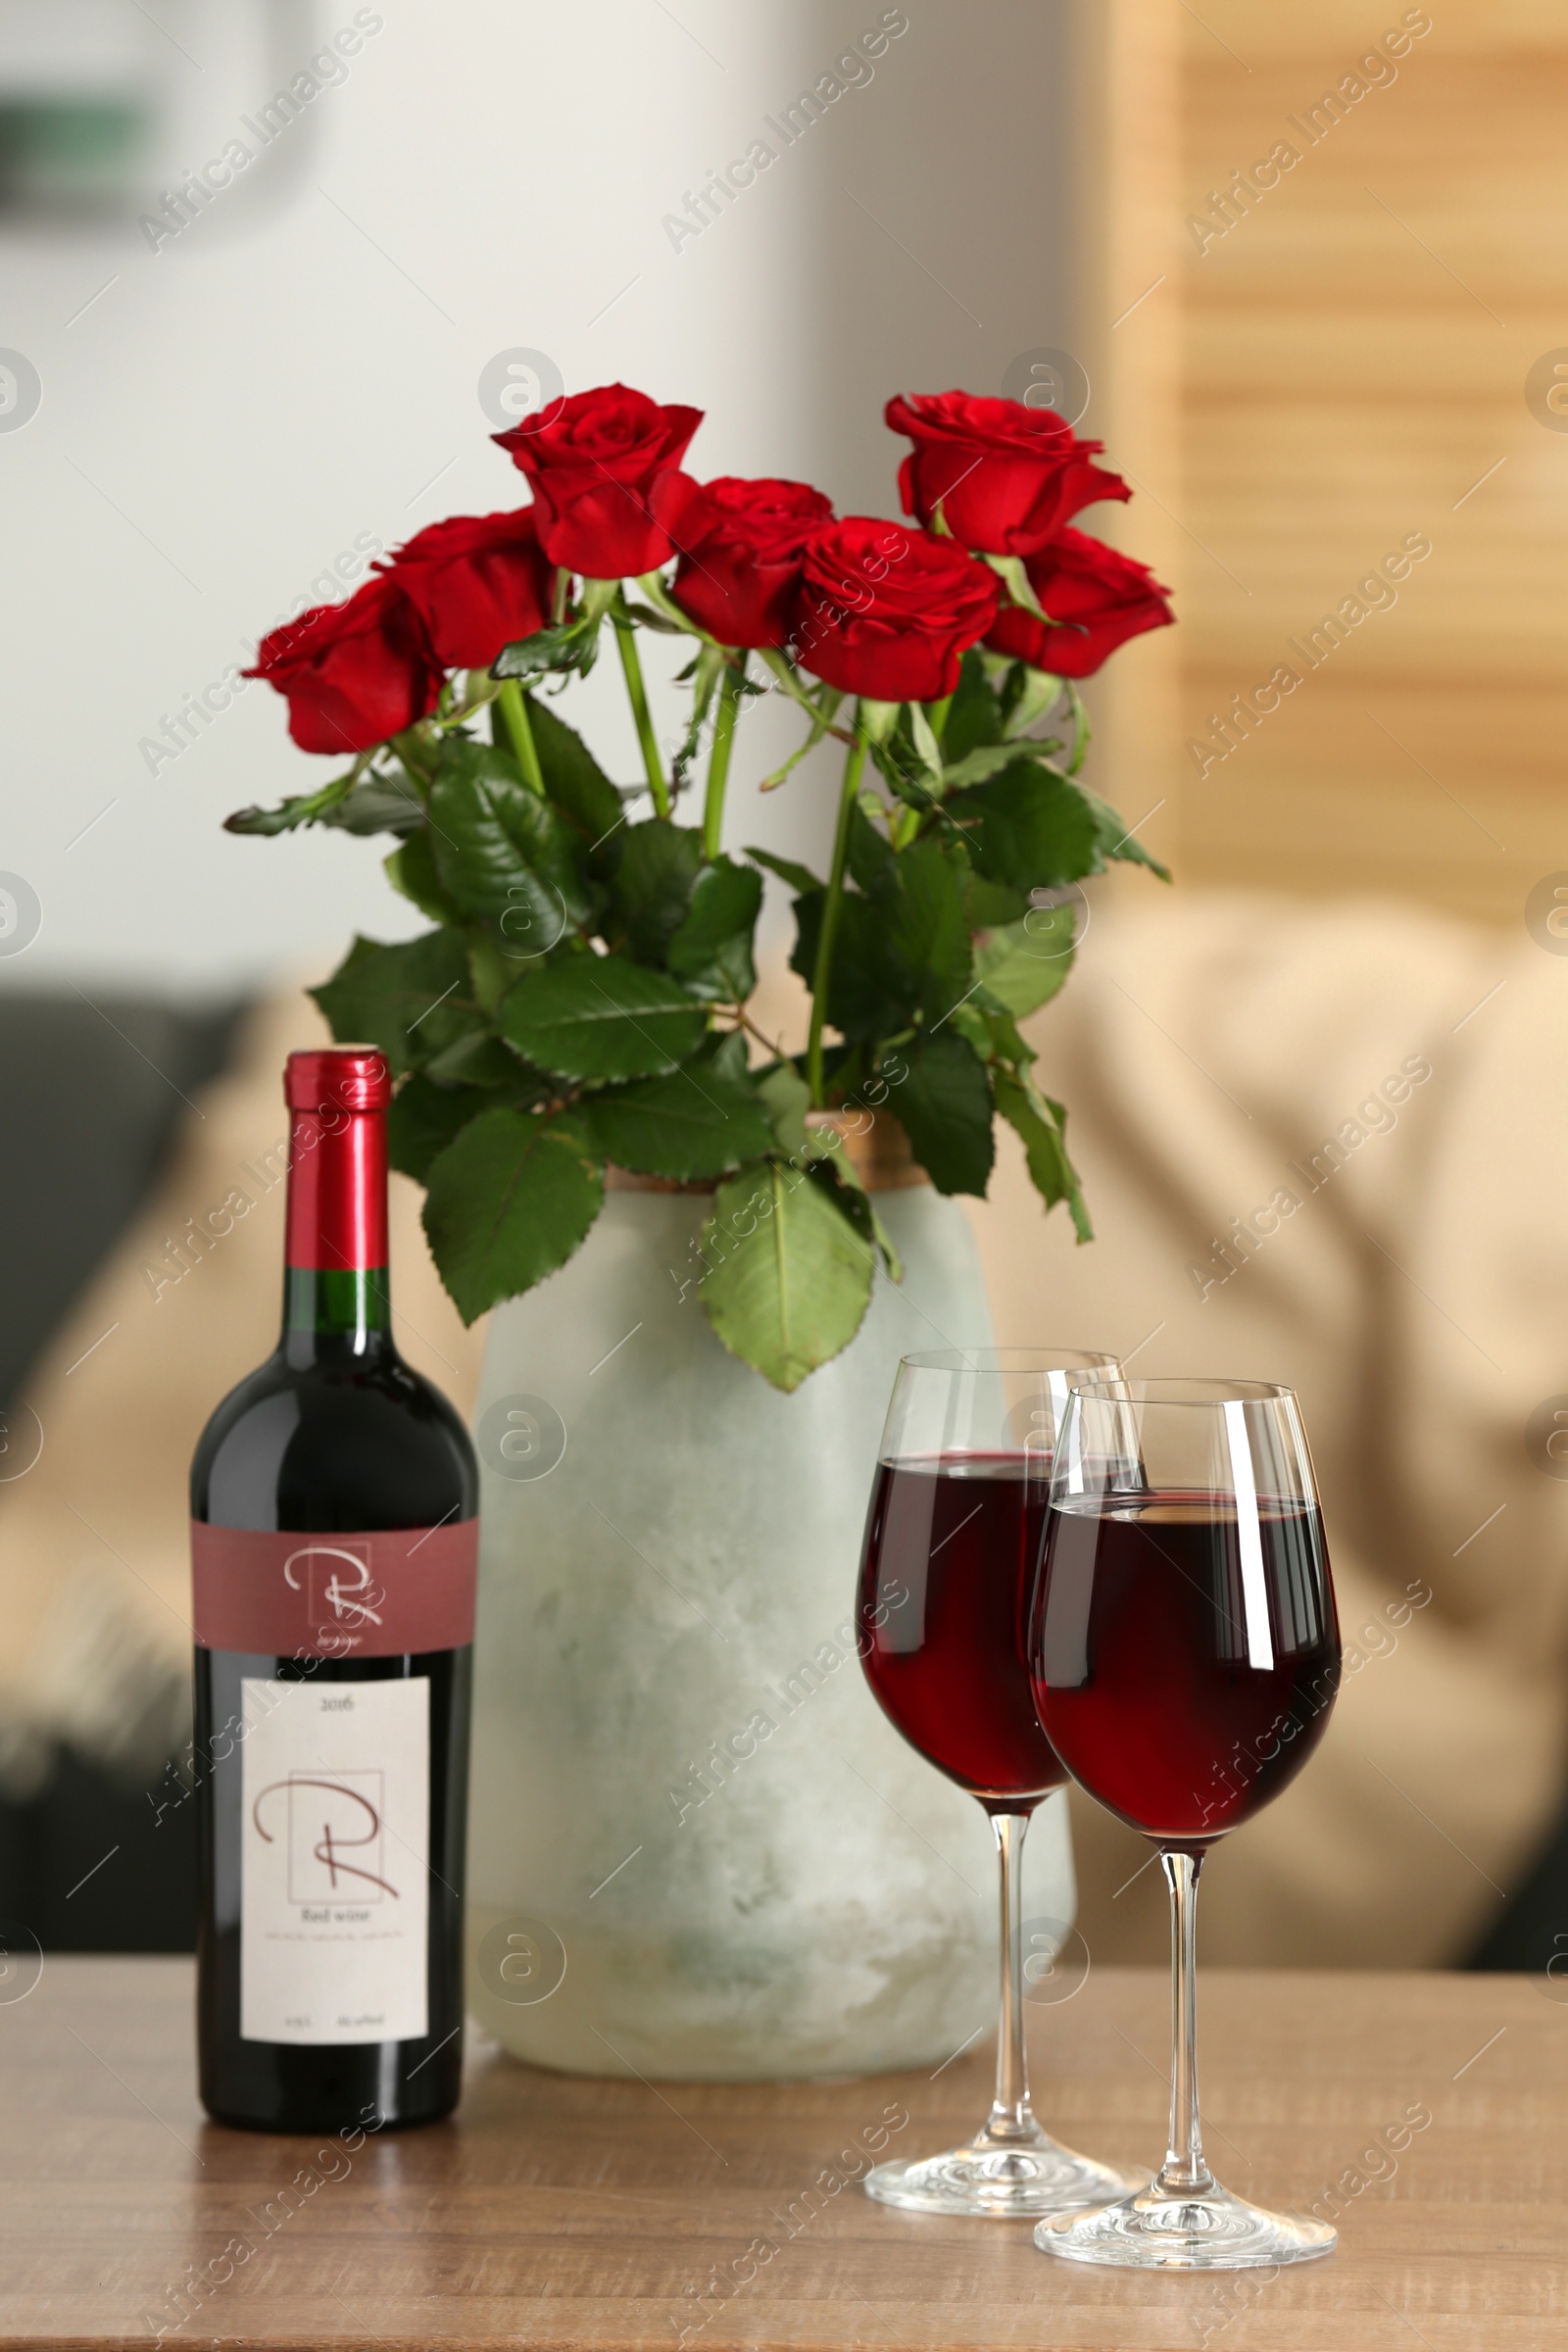 Photo of Bottle, glasses of red wine and vase with roses on wooden table in room. Romantic date